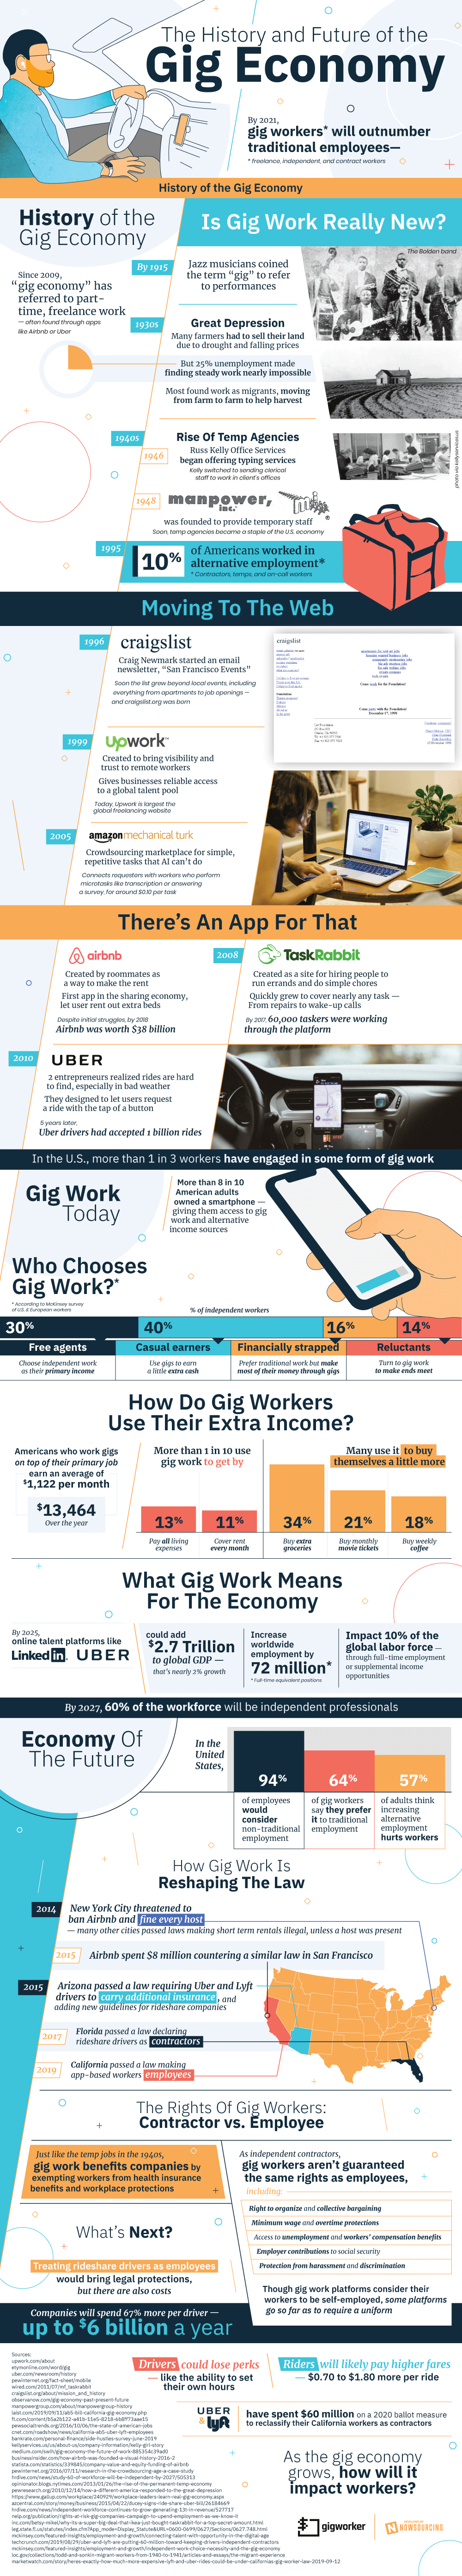 The History and Future of the Gig Economy